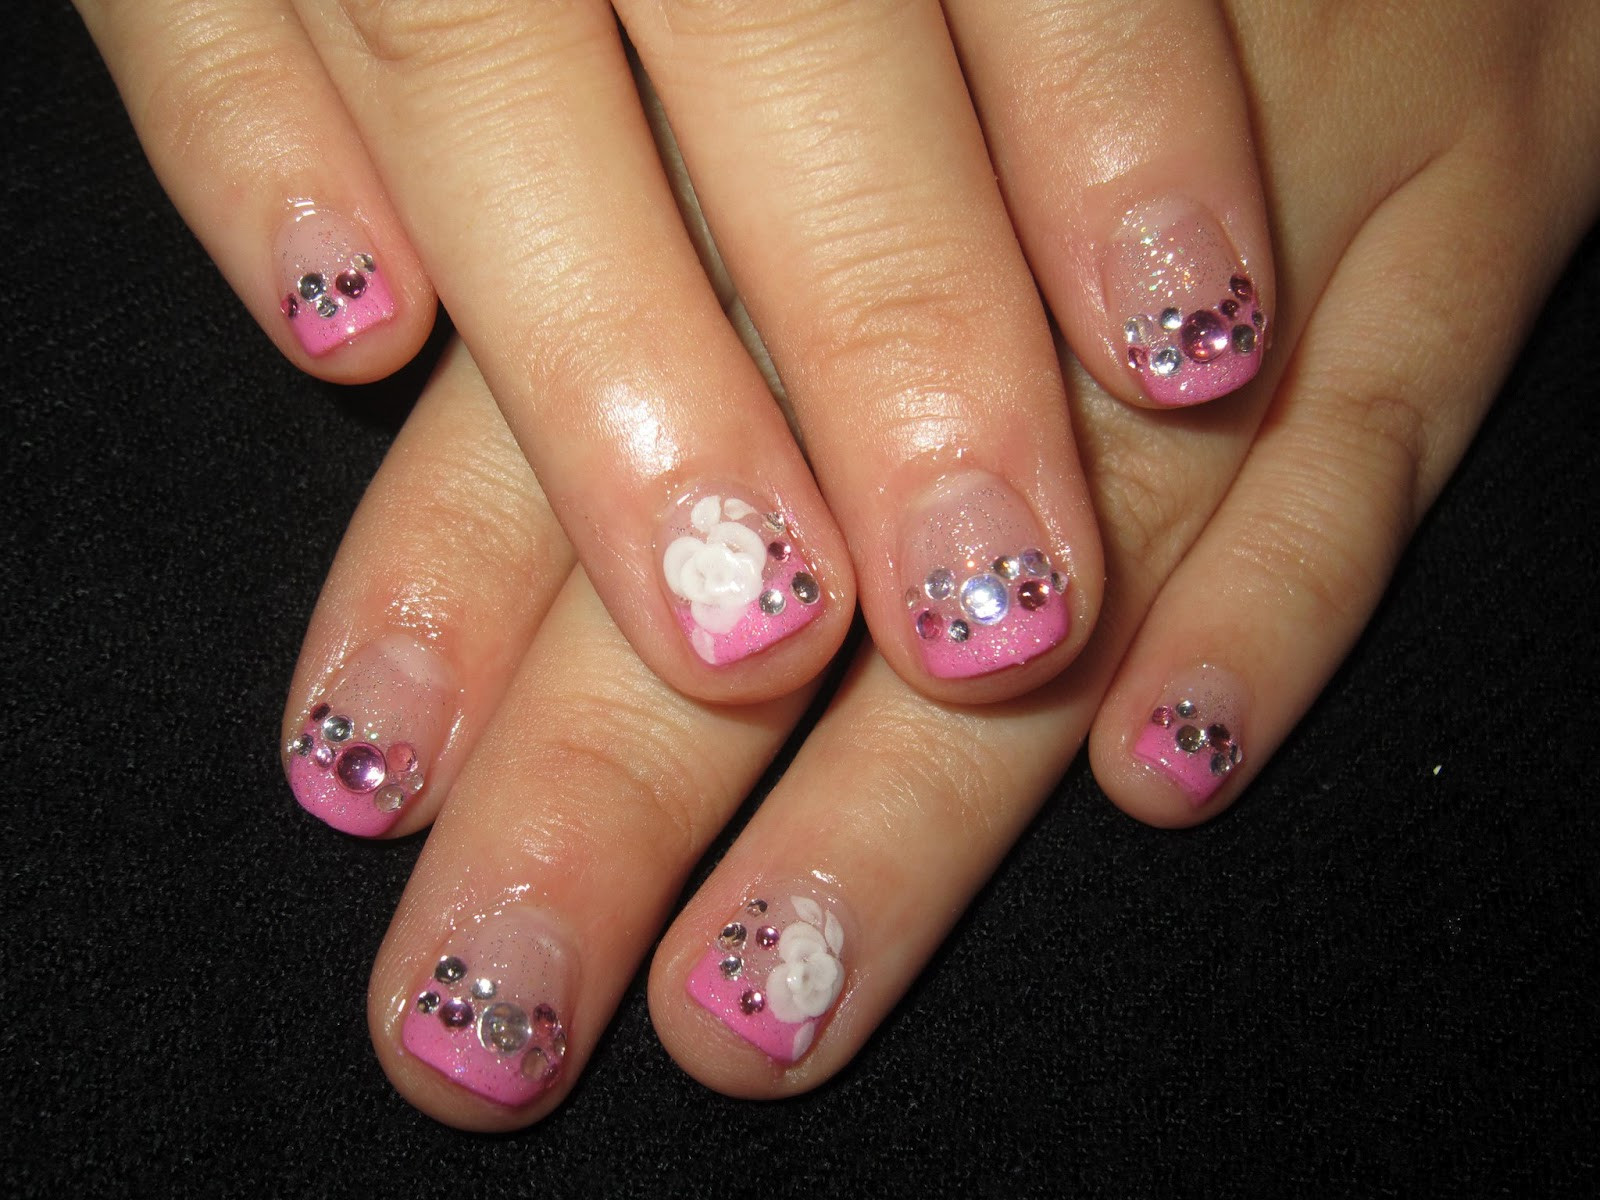 French Manicure Nail Art Designs
 5000 ideas about French Nail Designs on Pinterest Pccala